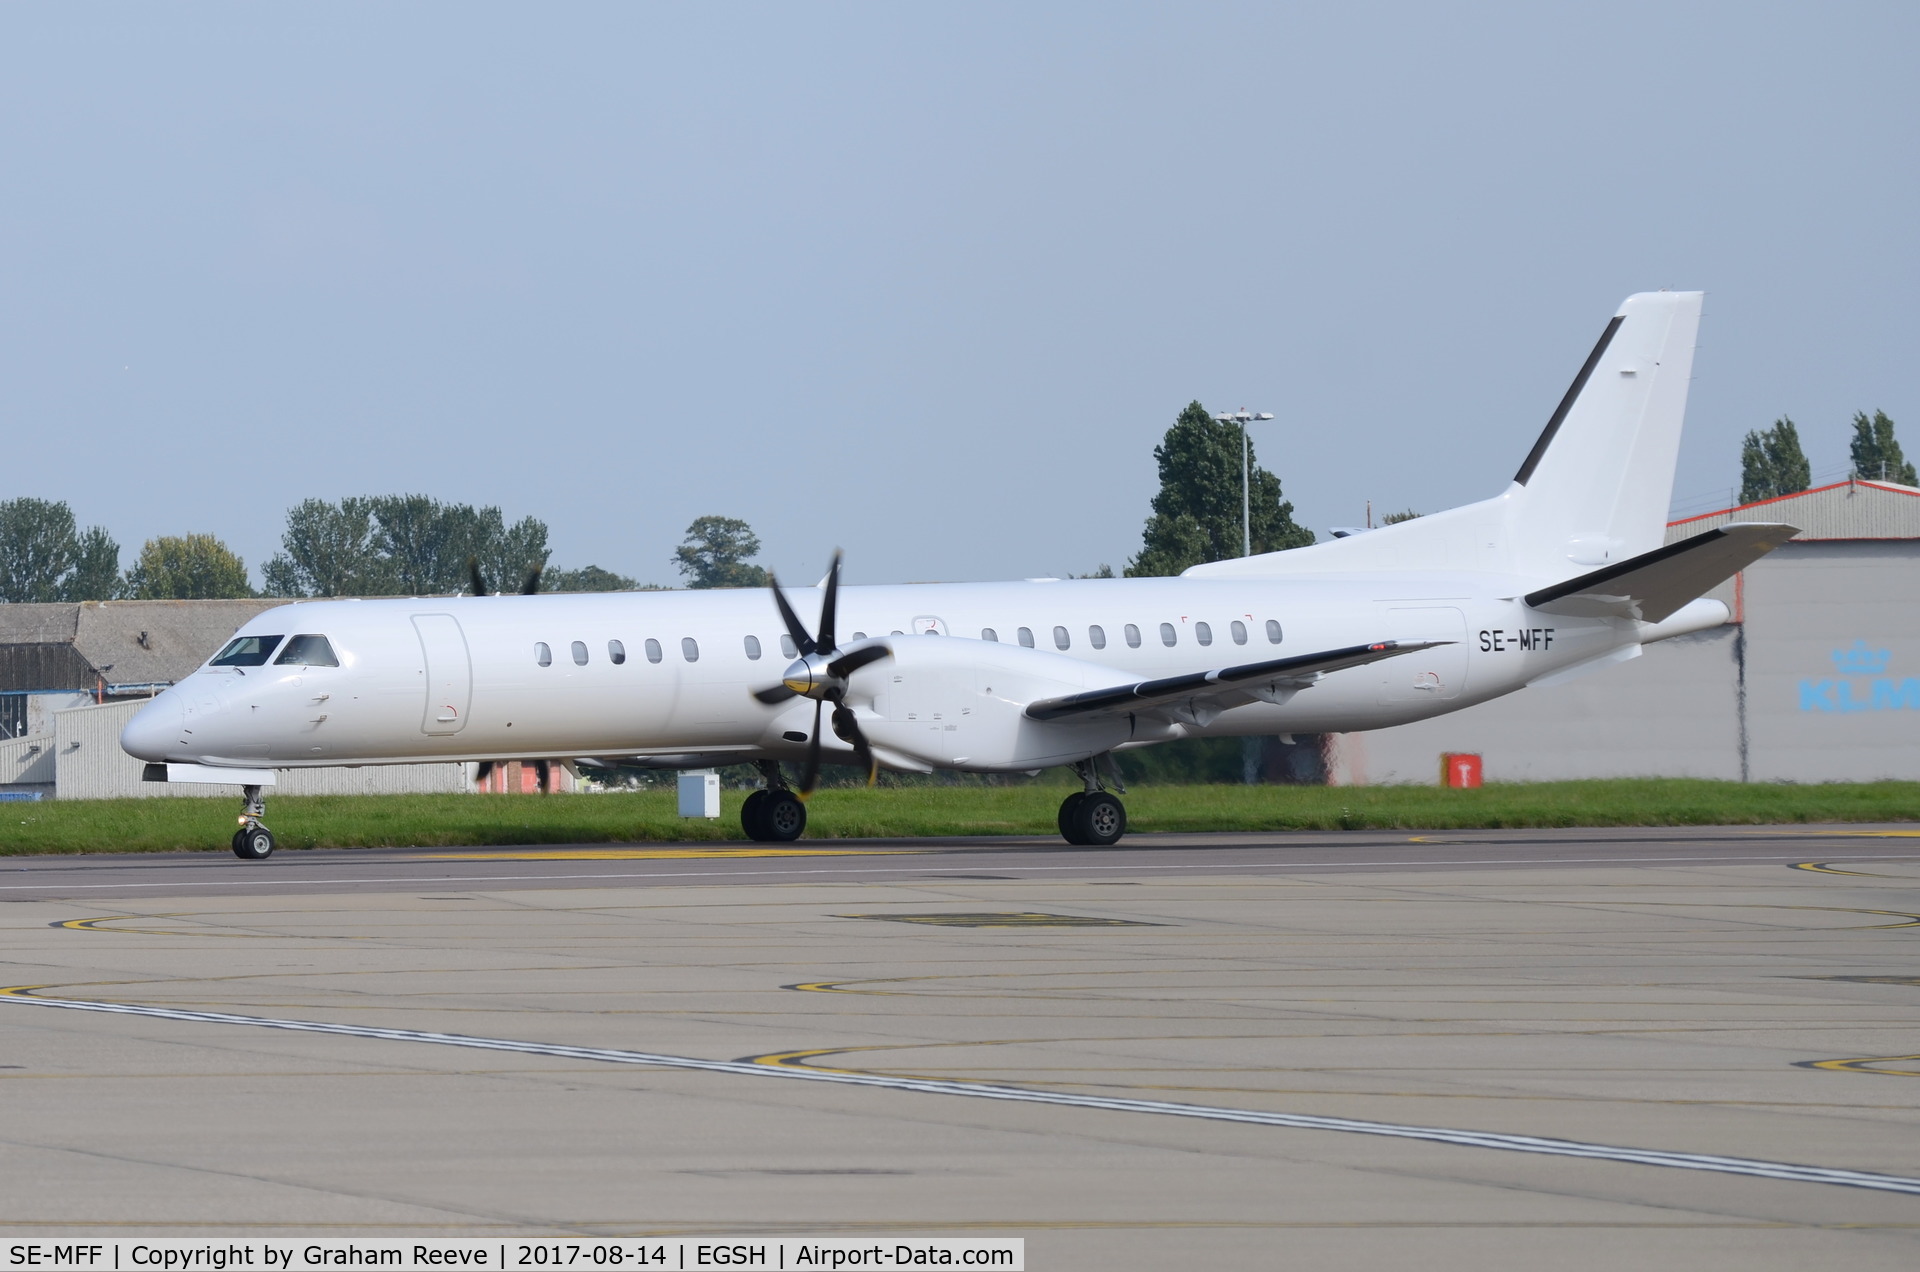 SE-MFF, 1996 Saab 2000 C/N 2000-038, Departing from Norwich.